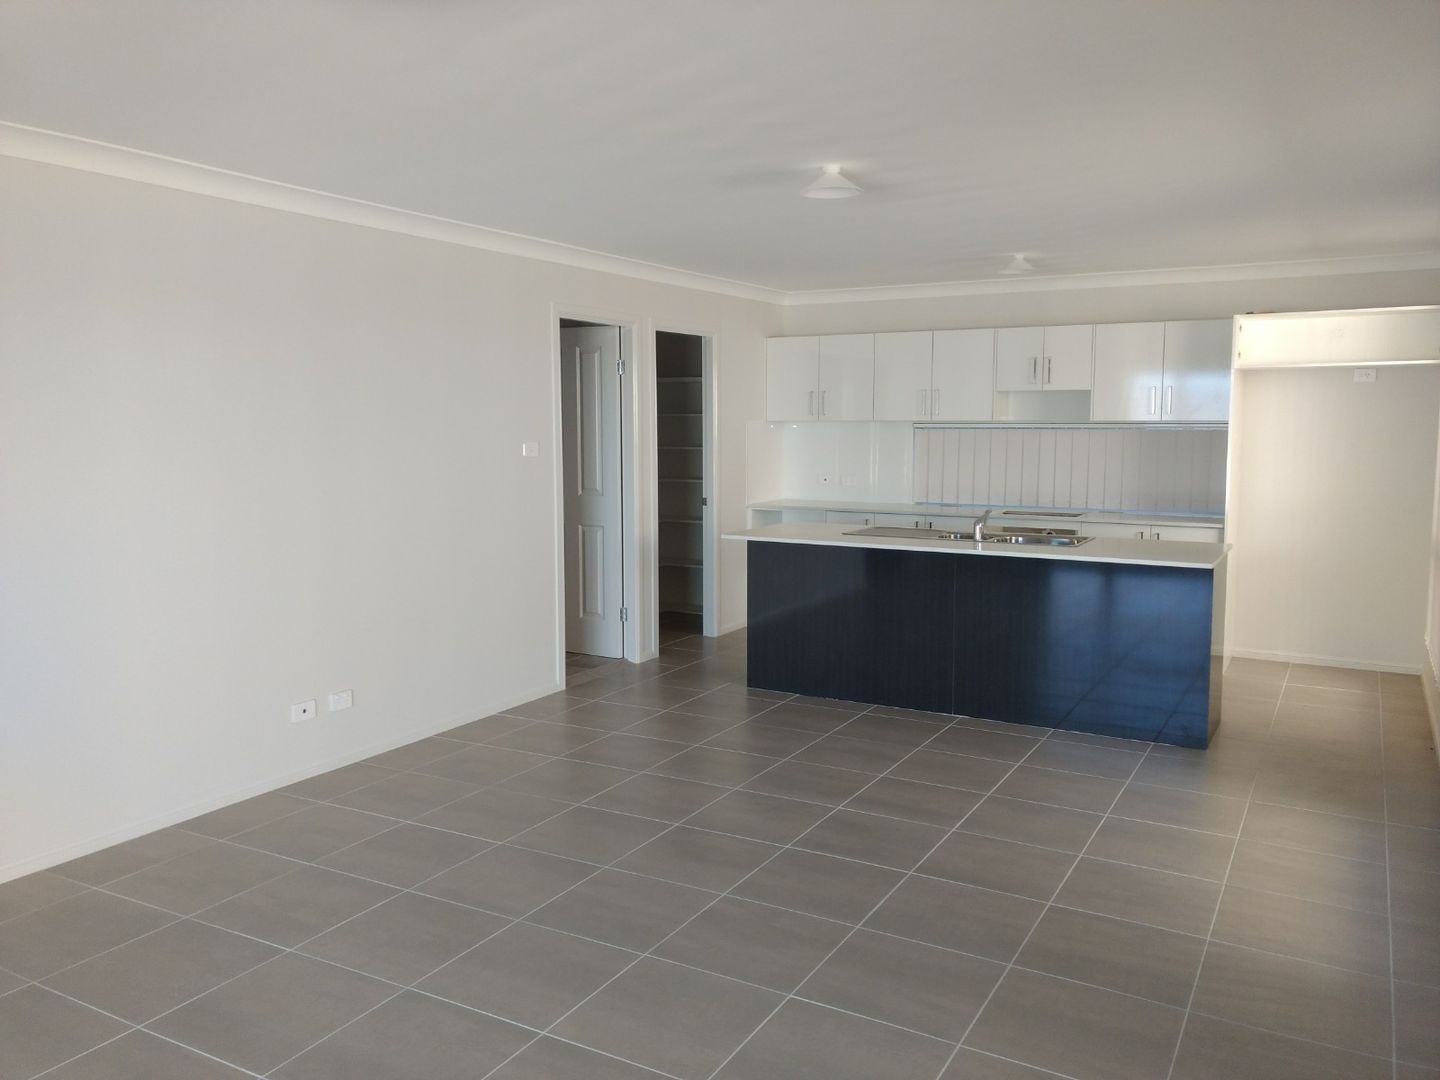 2/1536 Brittany Avenue, Rutherford NSW 2320, Image 1